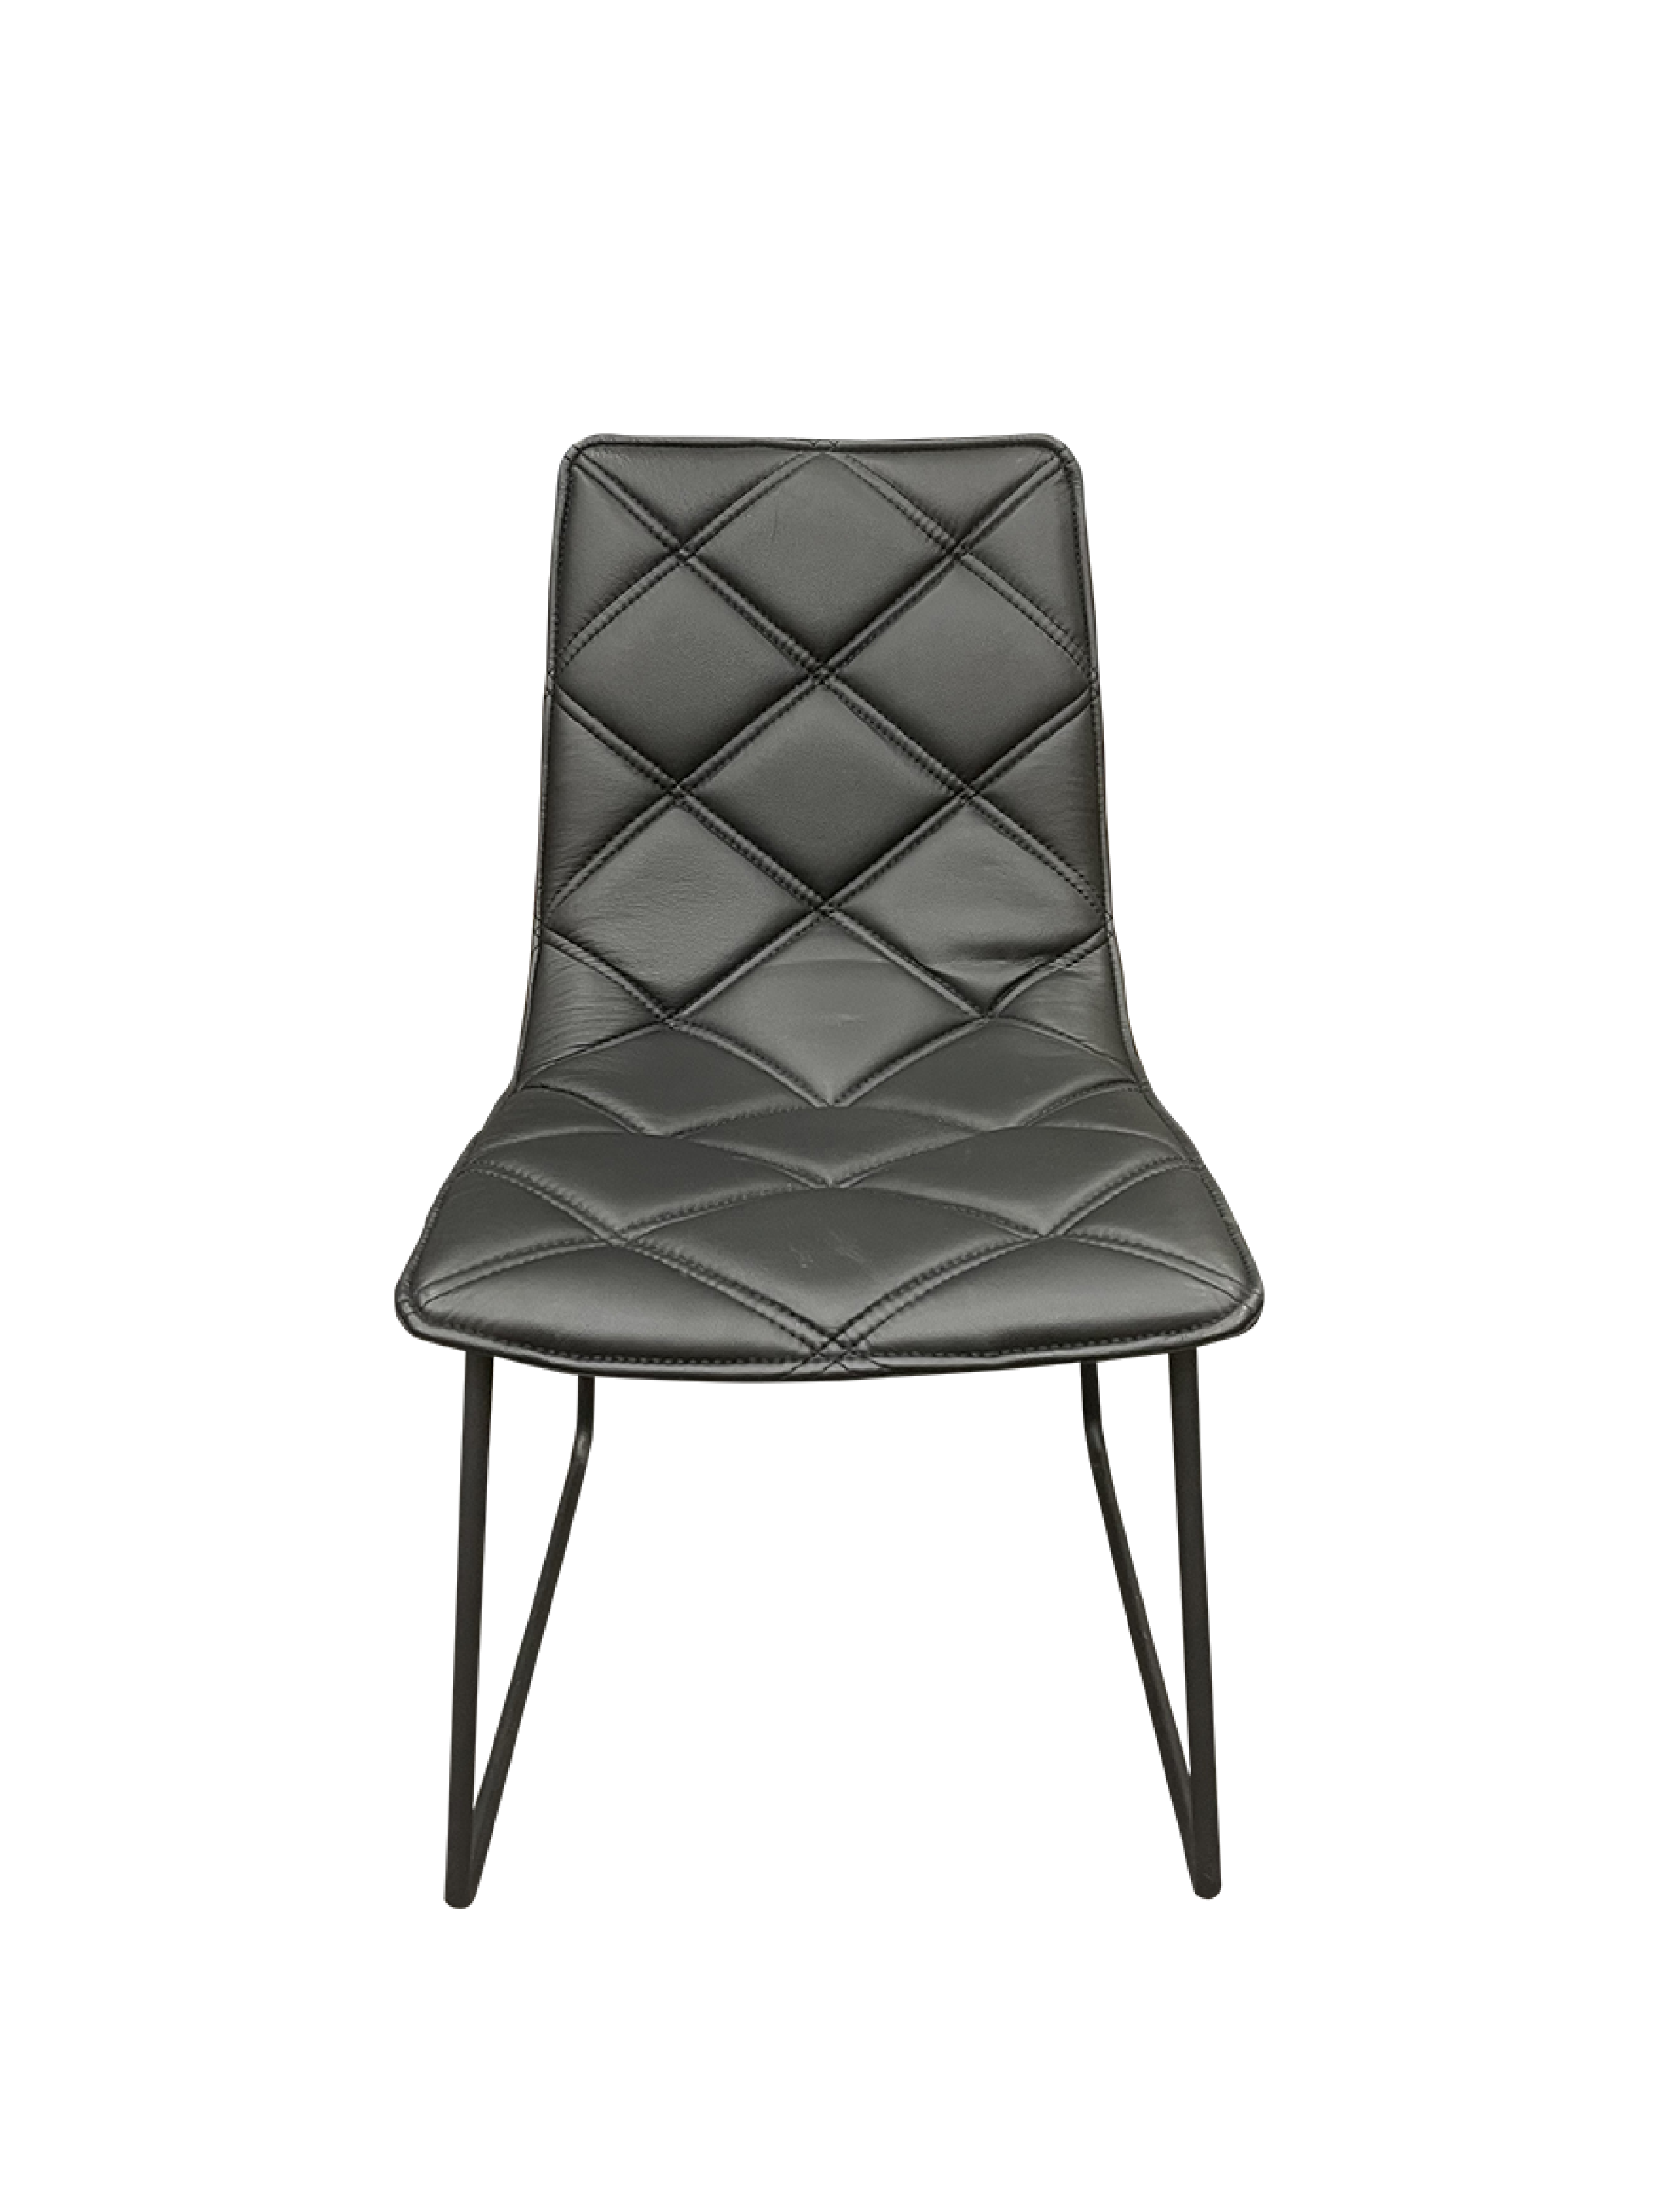 BLACK FAUX LEATHER DINING CHAIR - Furniture-Dining Room Furniture ...